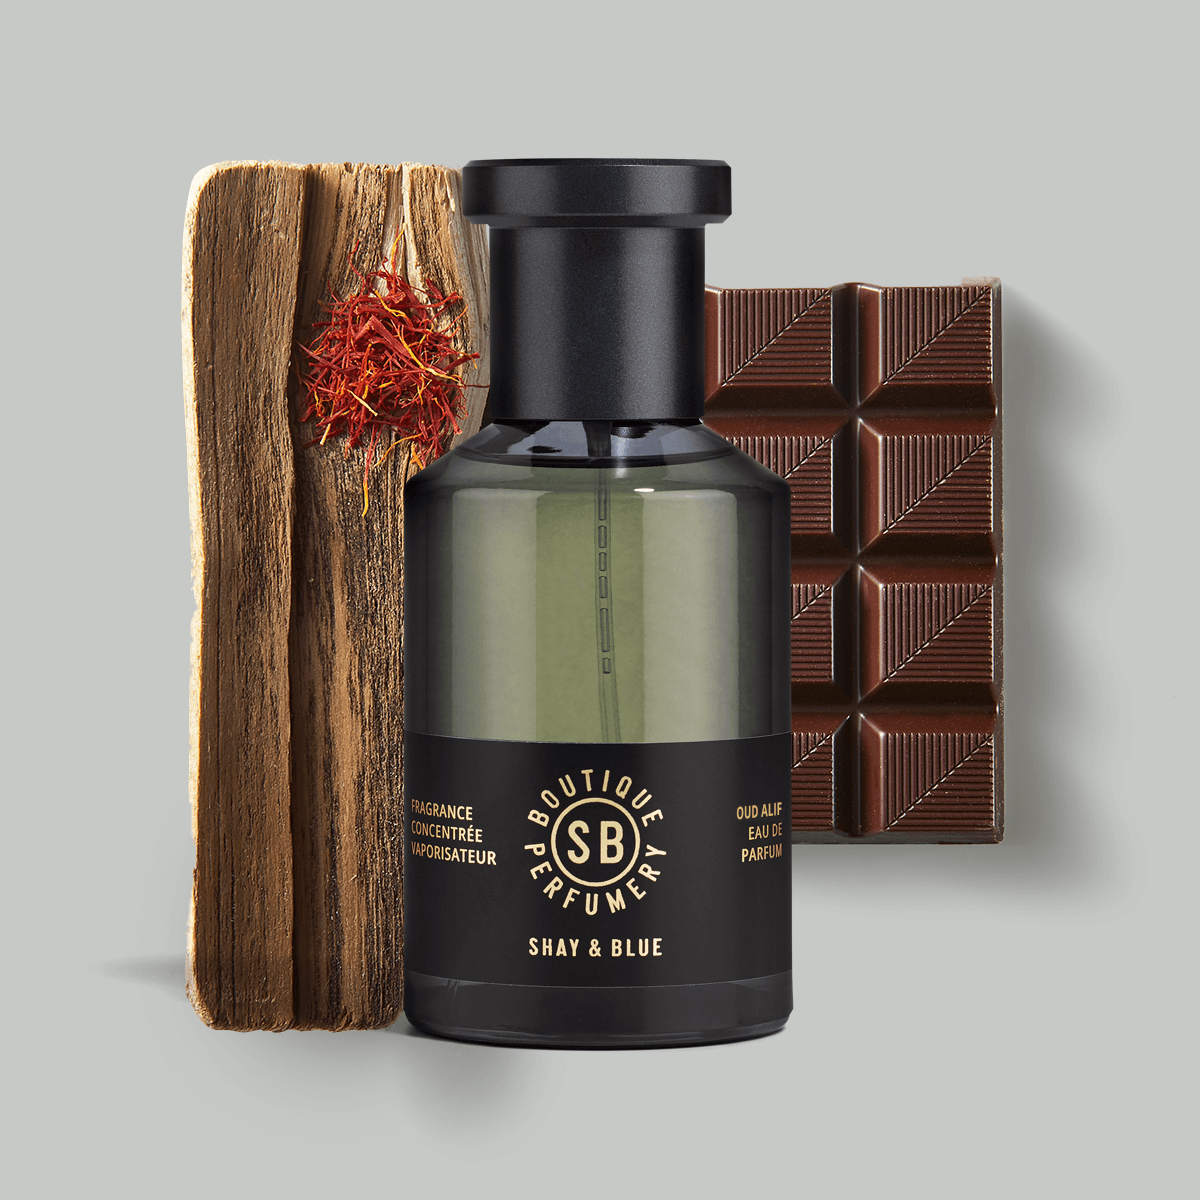 Oud Alif Fragrance Concentrate 100ml | The finest oud agarwood spiked with chocolat noir, saffron and dark patchouli. | Clean All Gender Fragrance | Shay & Blue